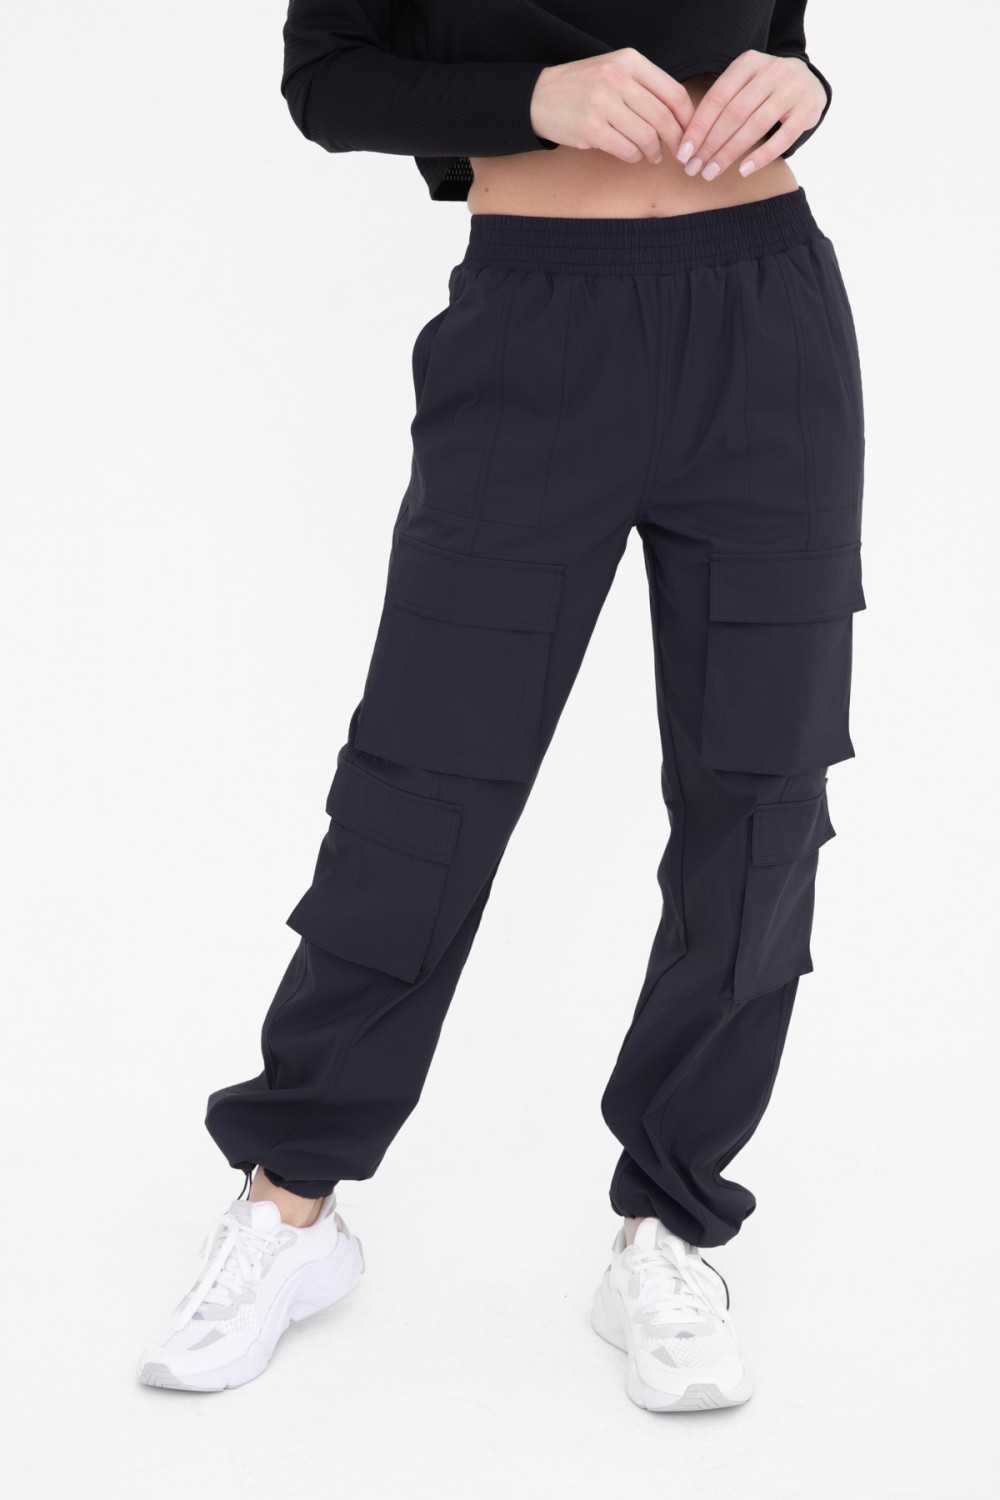 Aggregate more than 229 cargo pants with cuffed hems